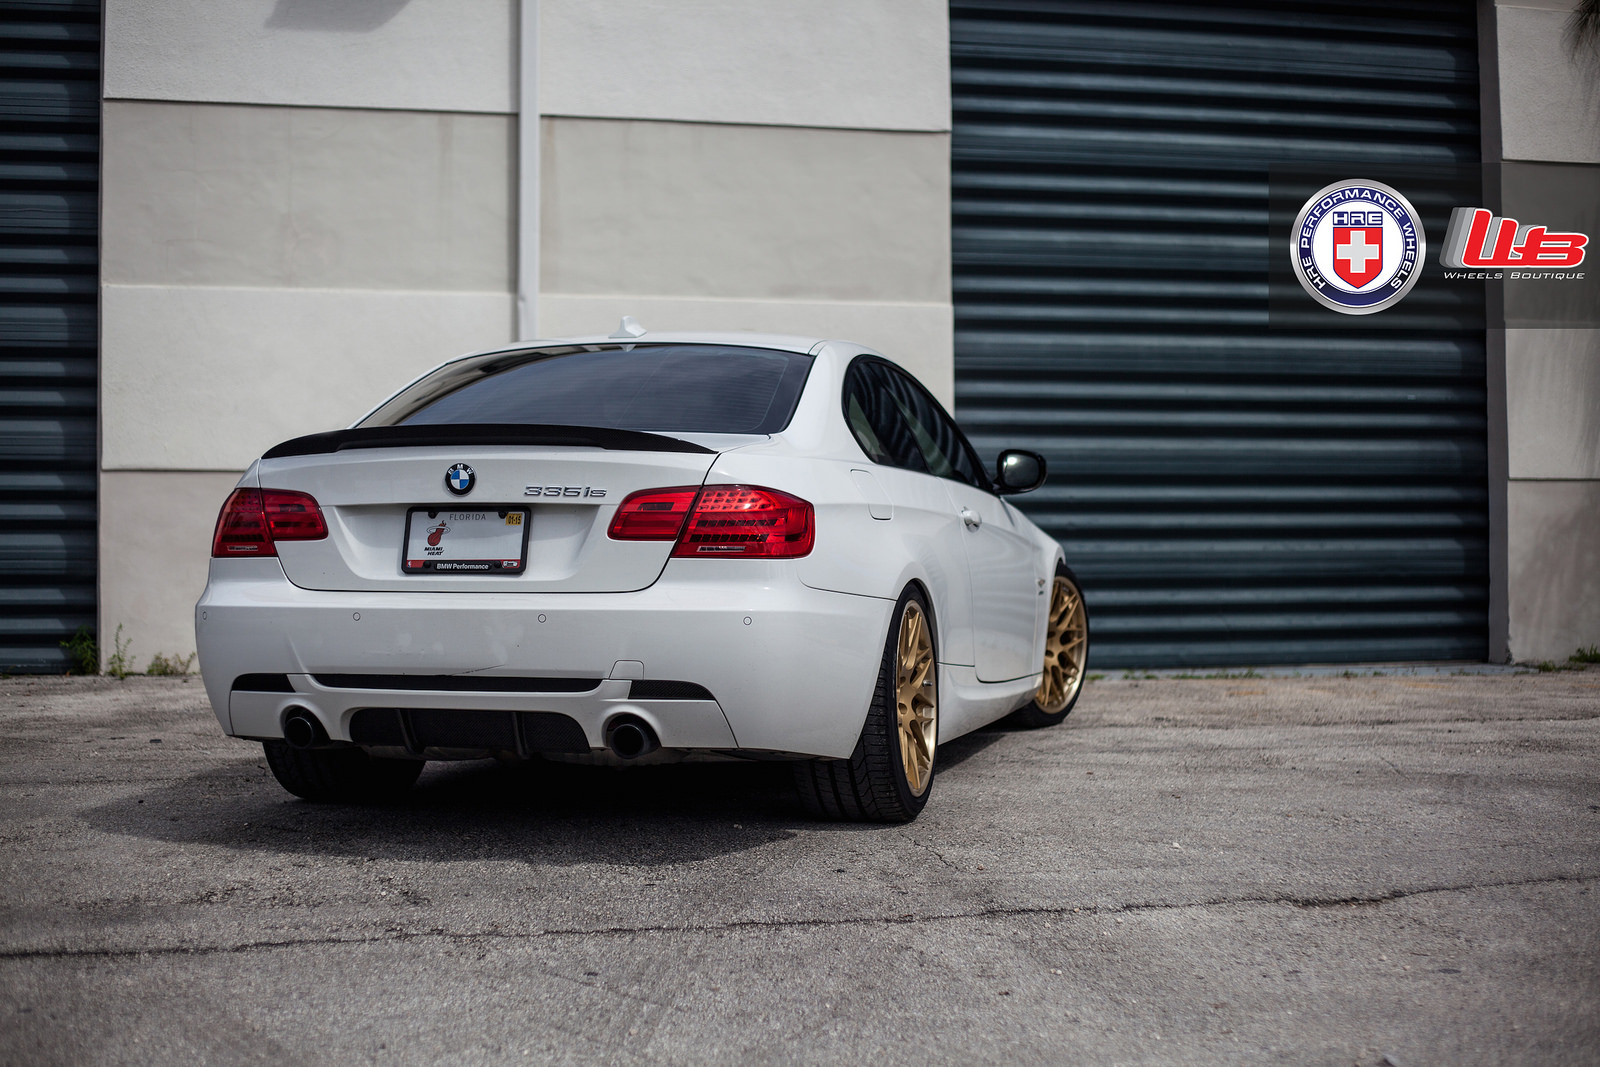 Classic Looking Alpine White BMW 335is With HRE Wheels 4